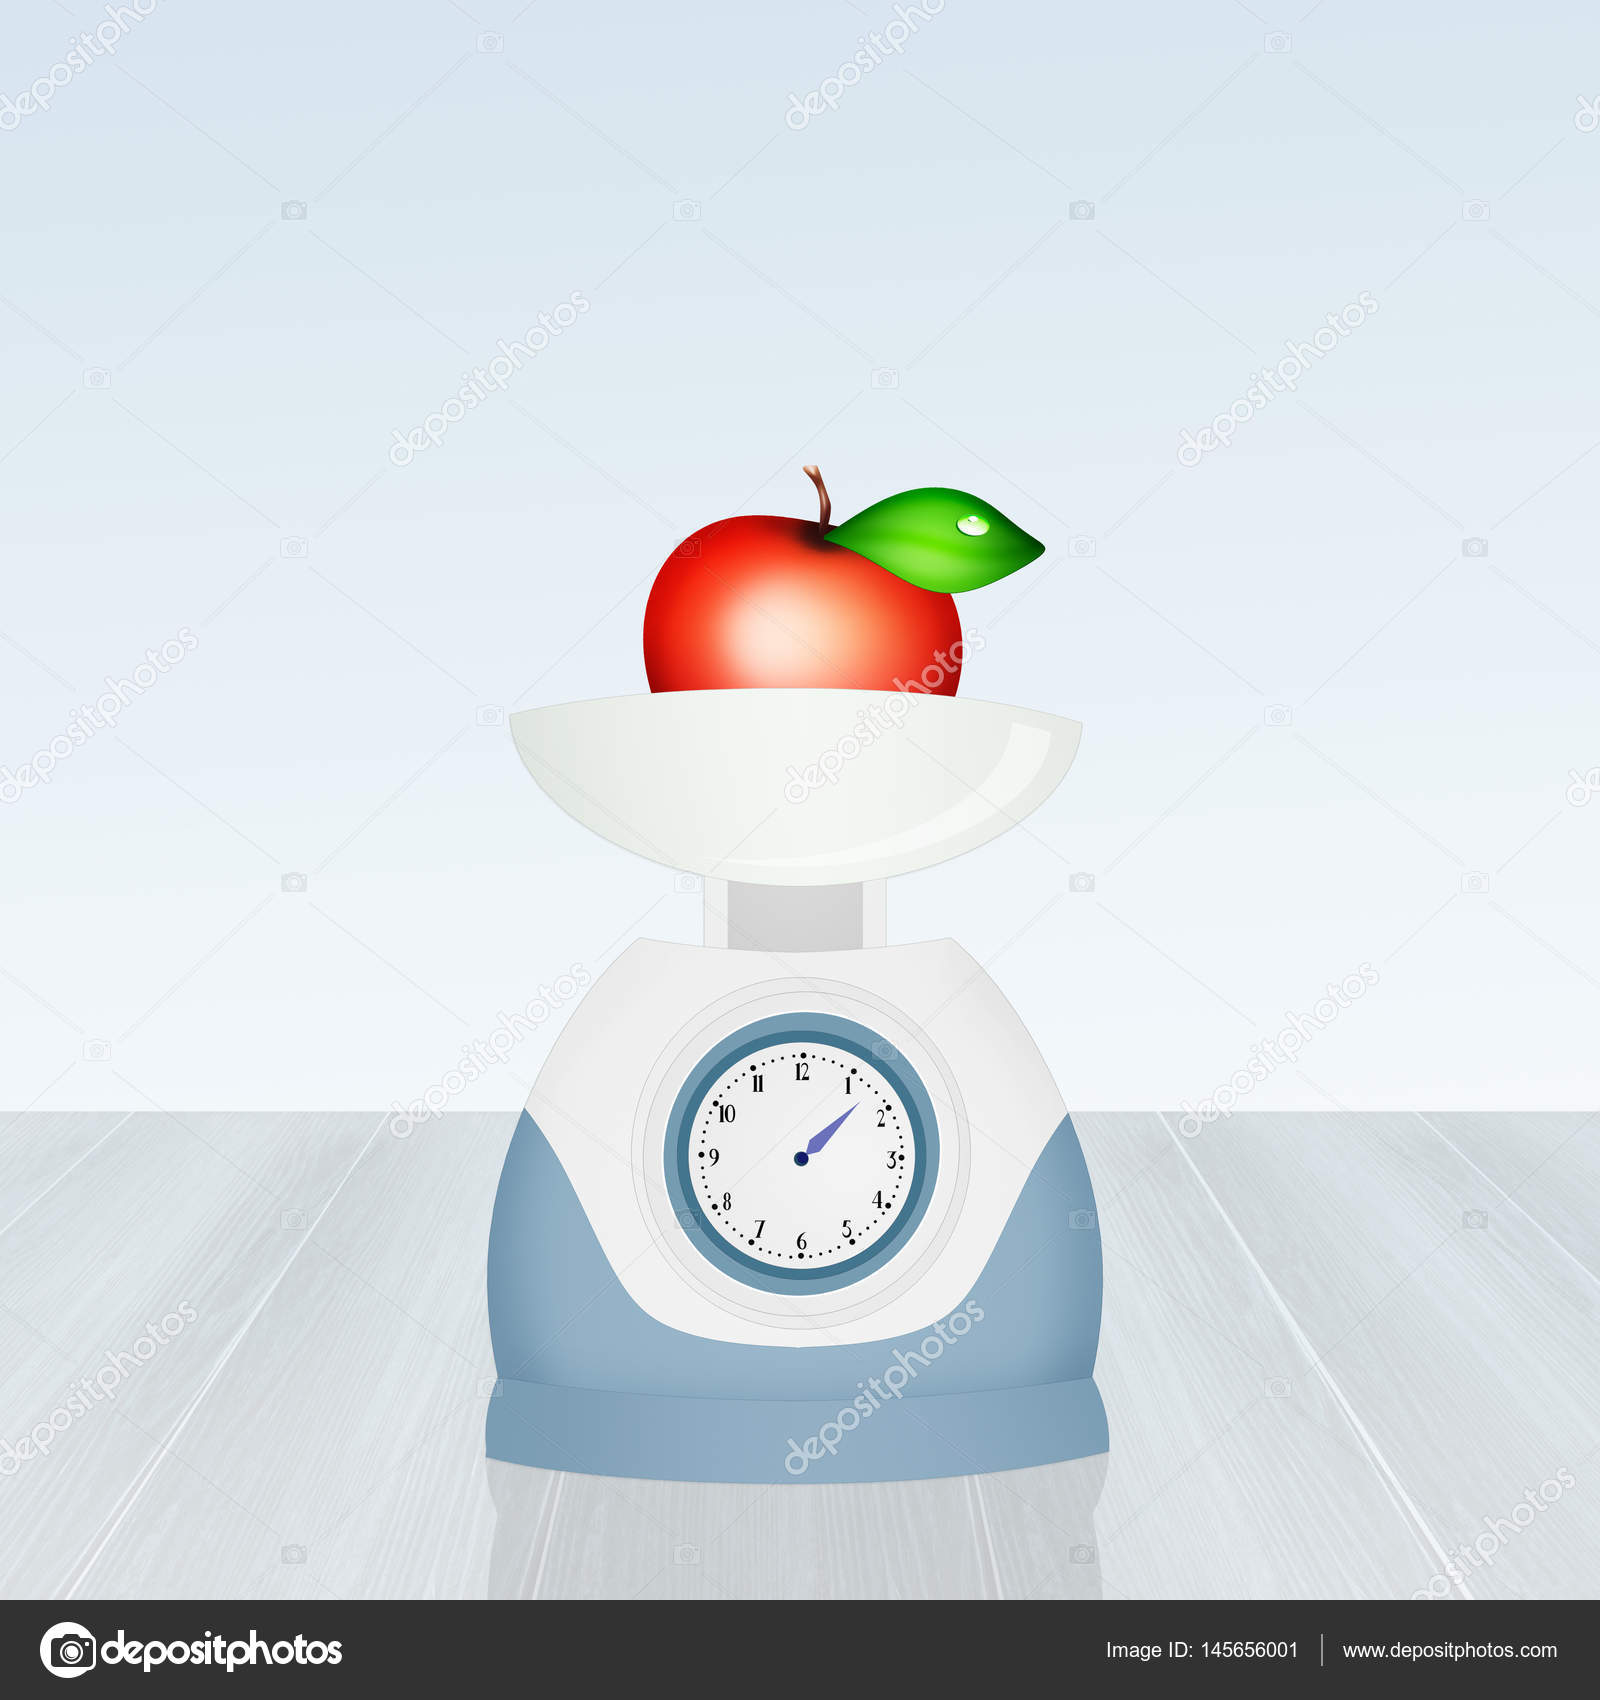 apple on weighing scales food — Stock Photo © adrenalina #145656001